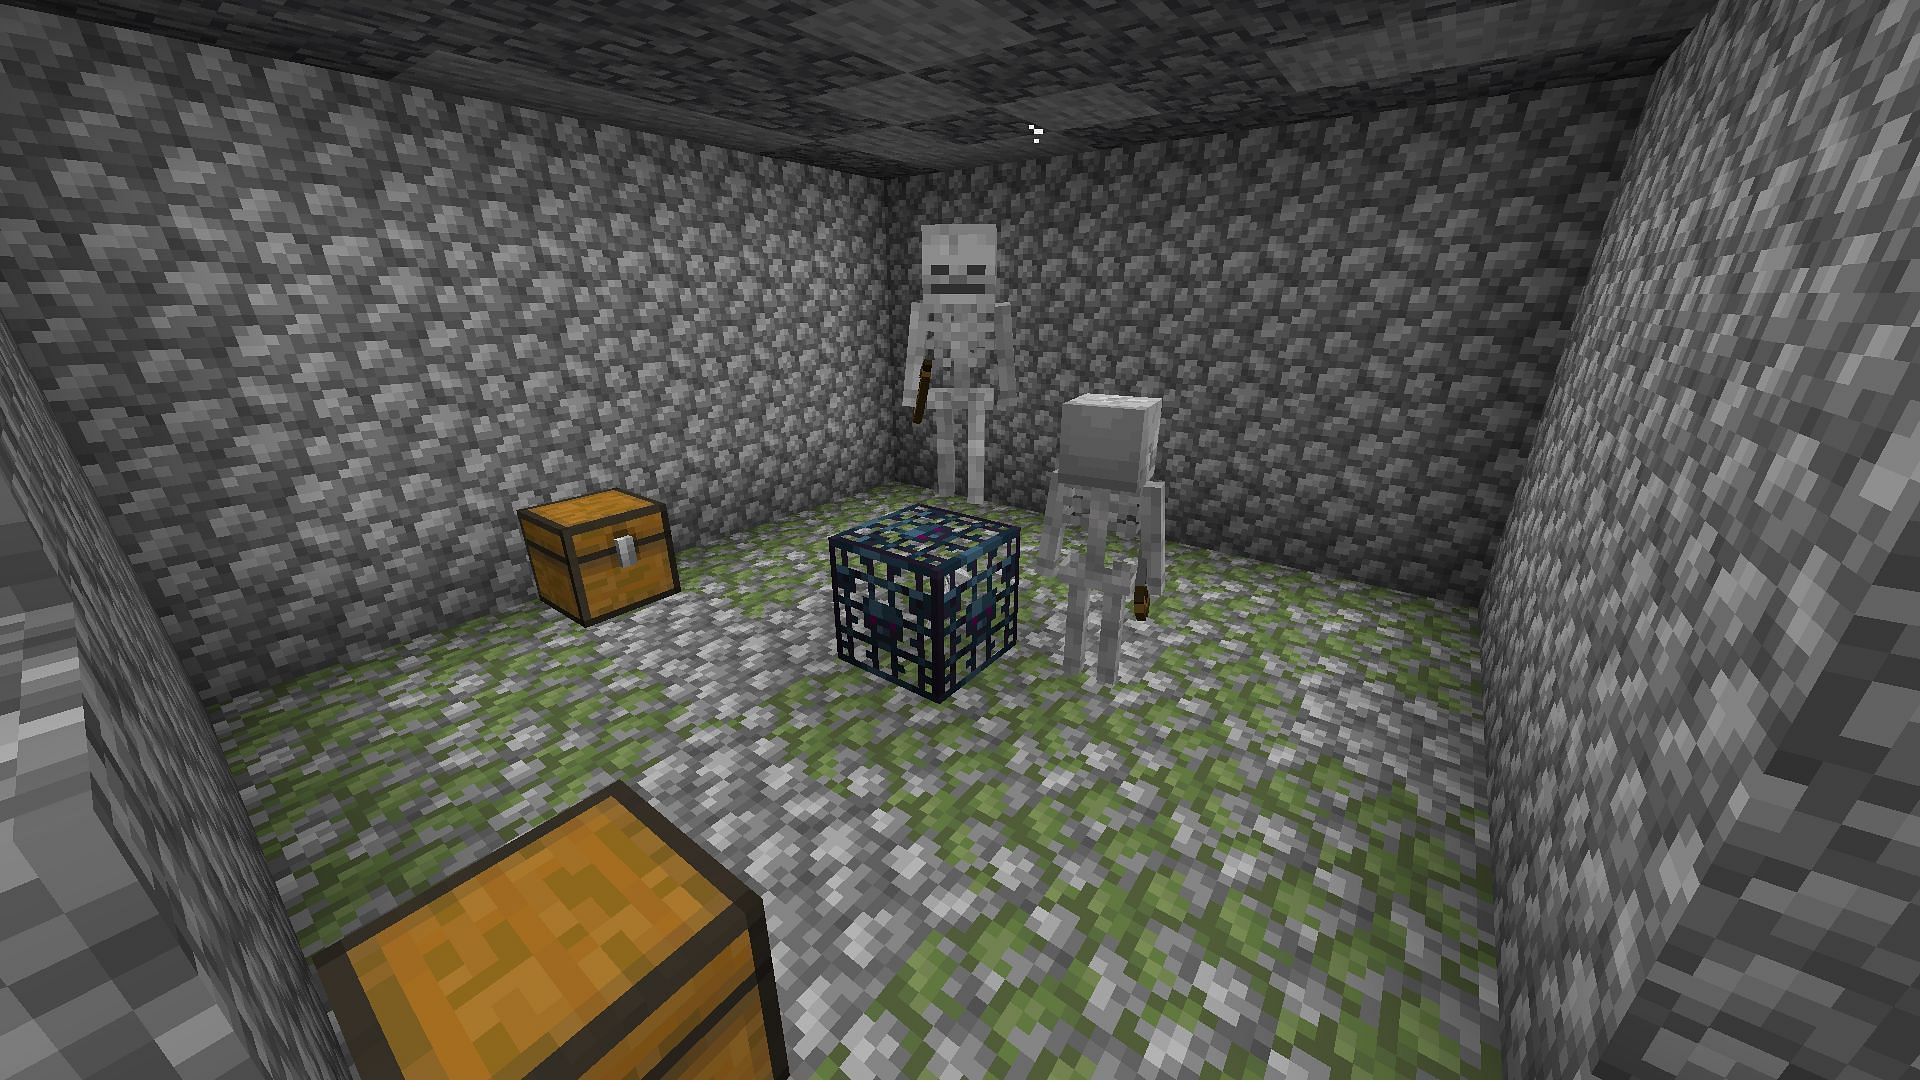 A skeleton spawner farm can be created to obtain loads of bones for bone meal in Minecraft (Image via Mojang)